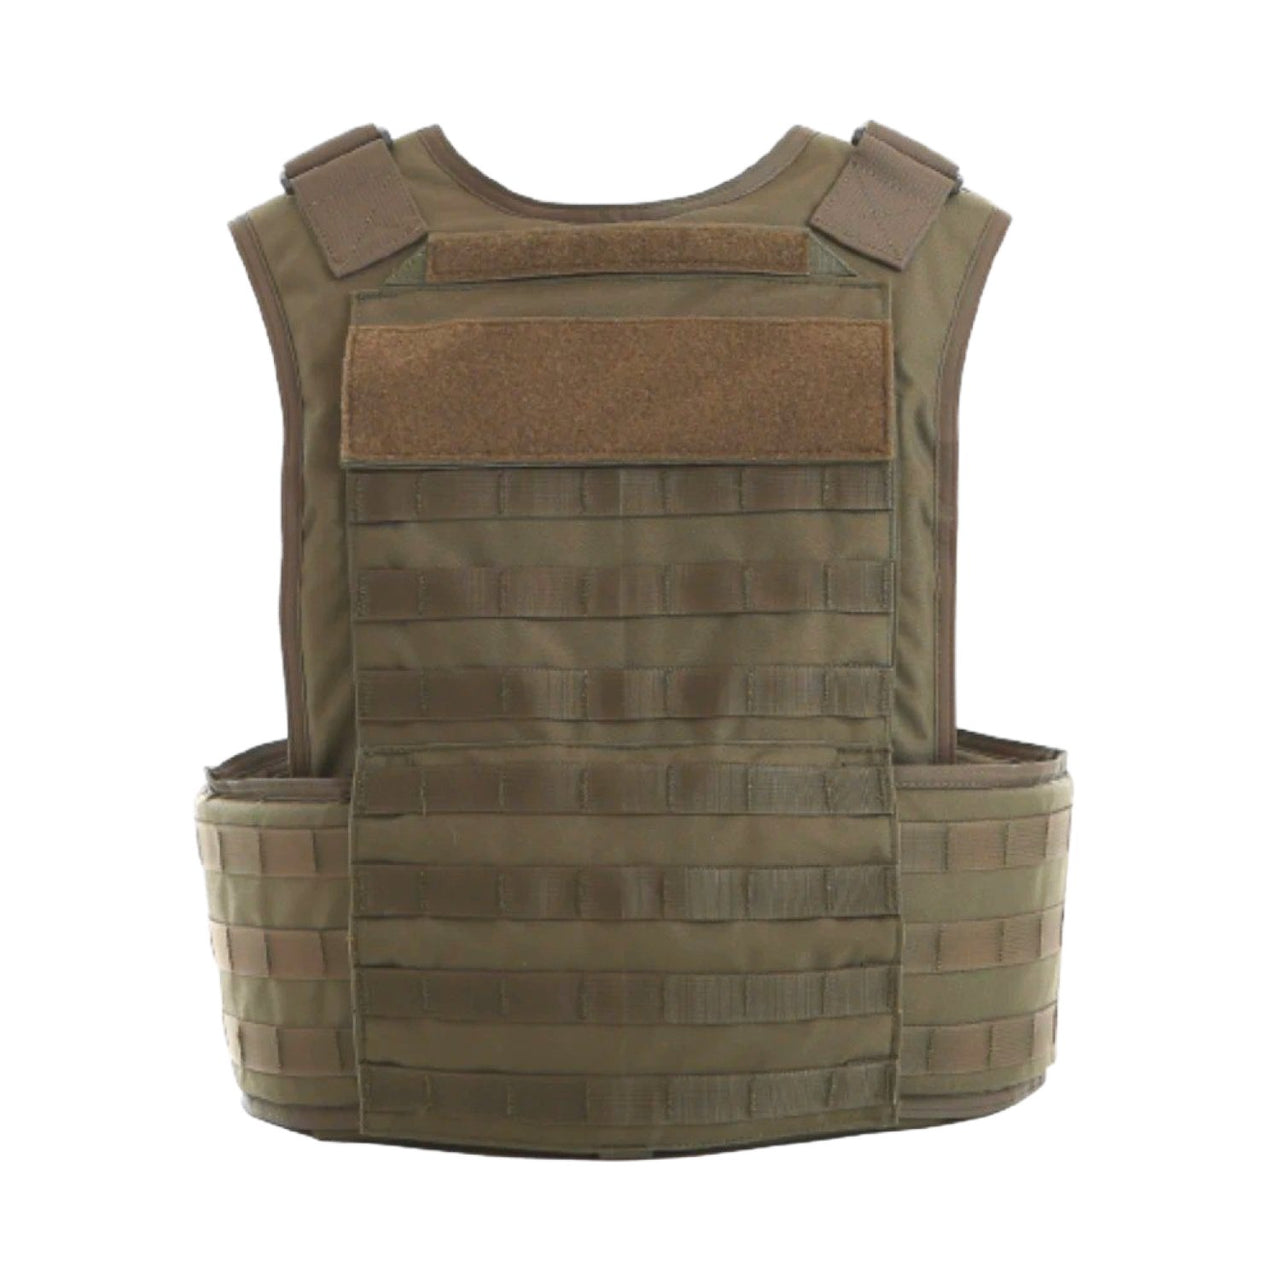 Olive green Body Armor Direct multi-threat Tactical Carrier with multiple rows of webbing and velcro patches, isolated on a white background.